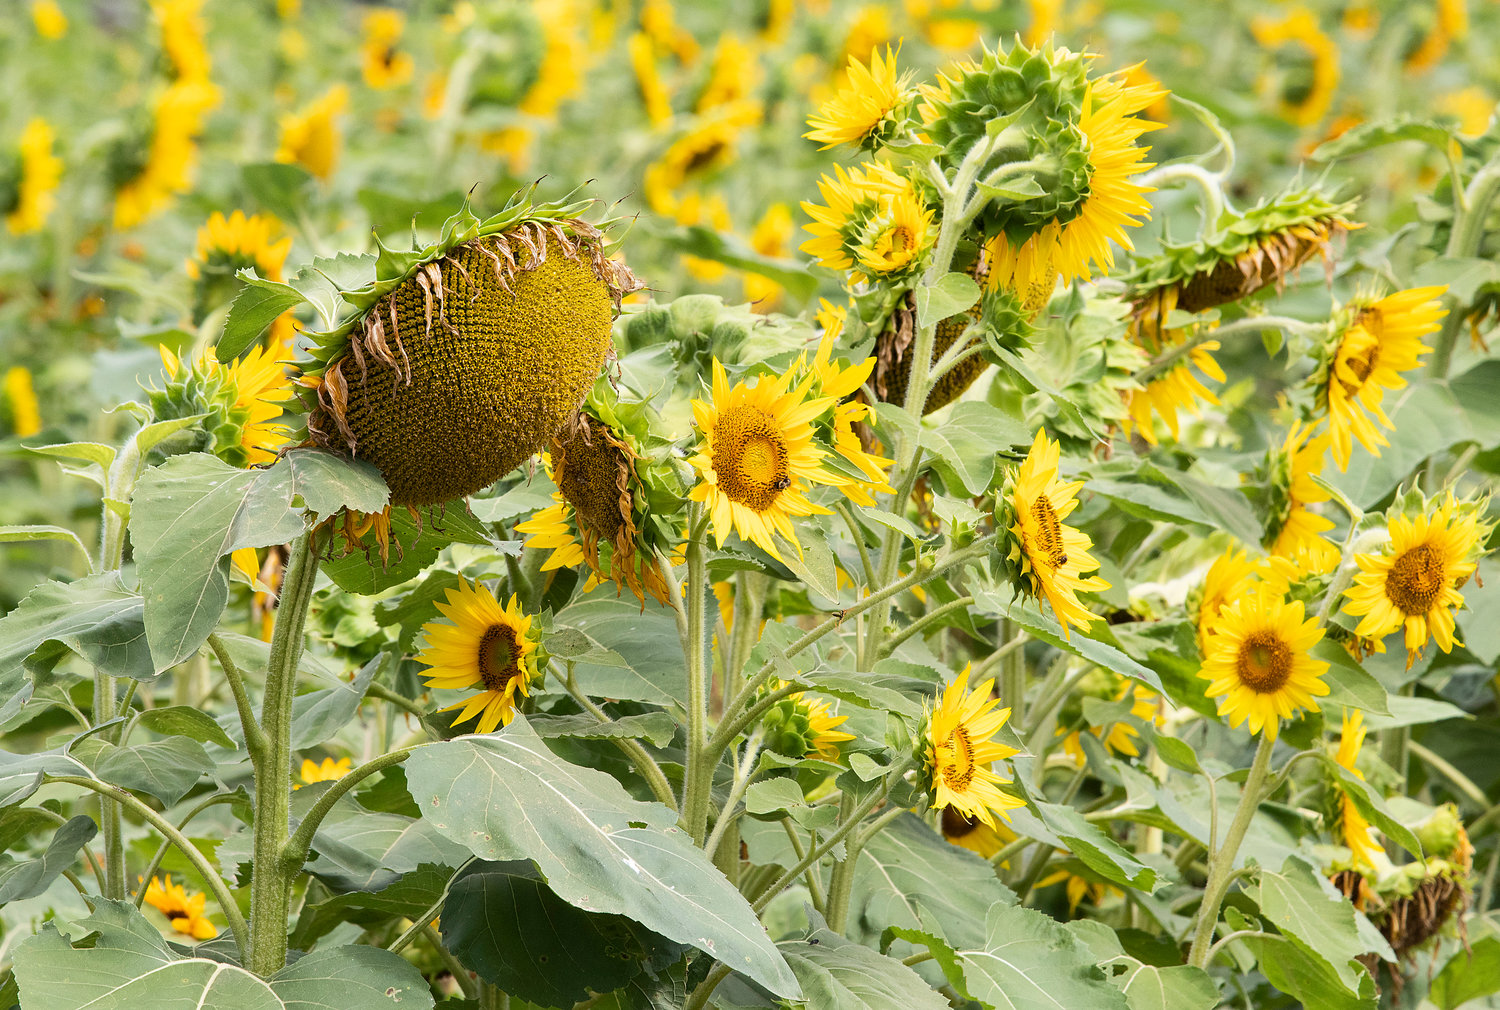 Sunflowers droop in the moist heat at Quonset View Farm.